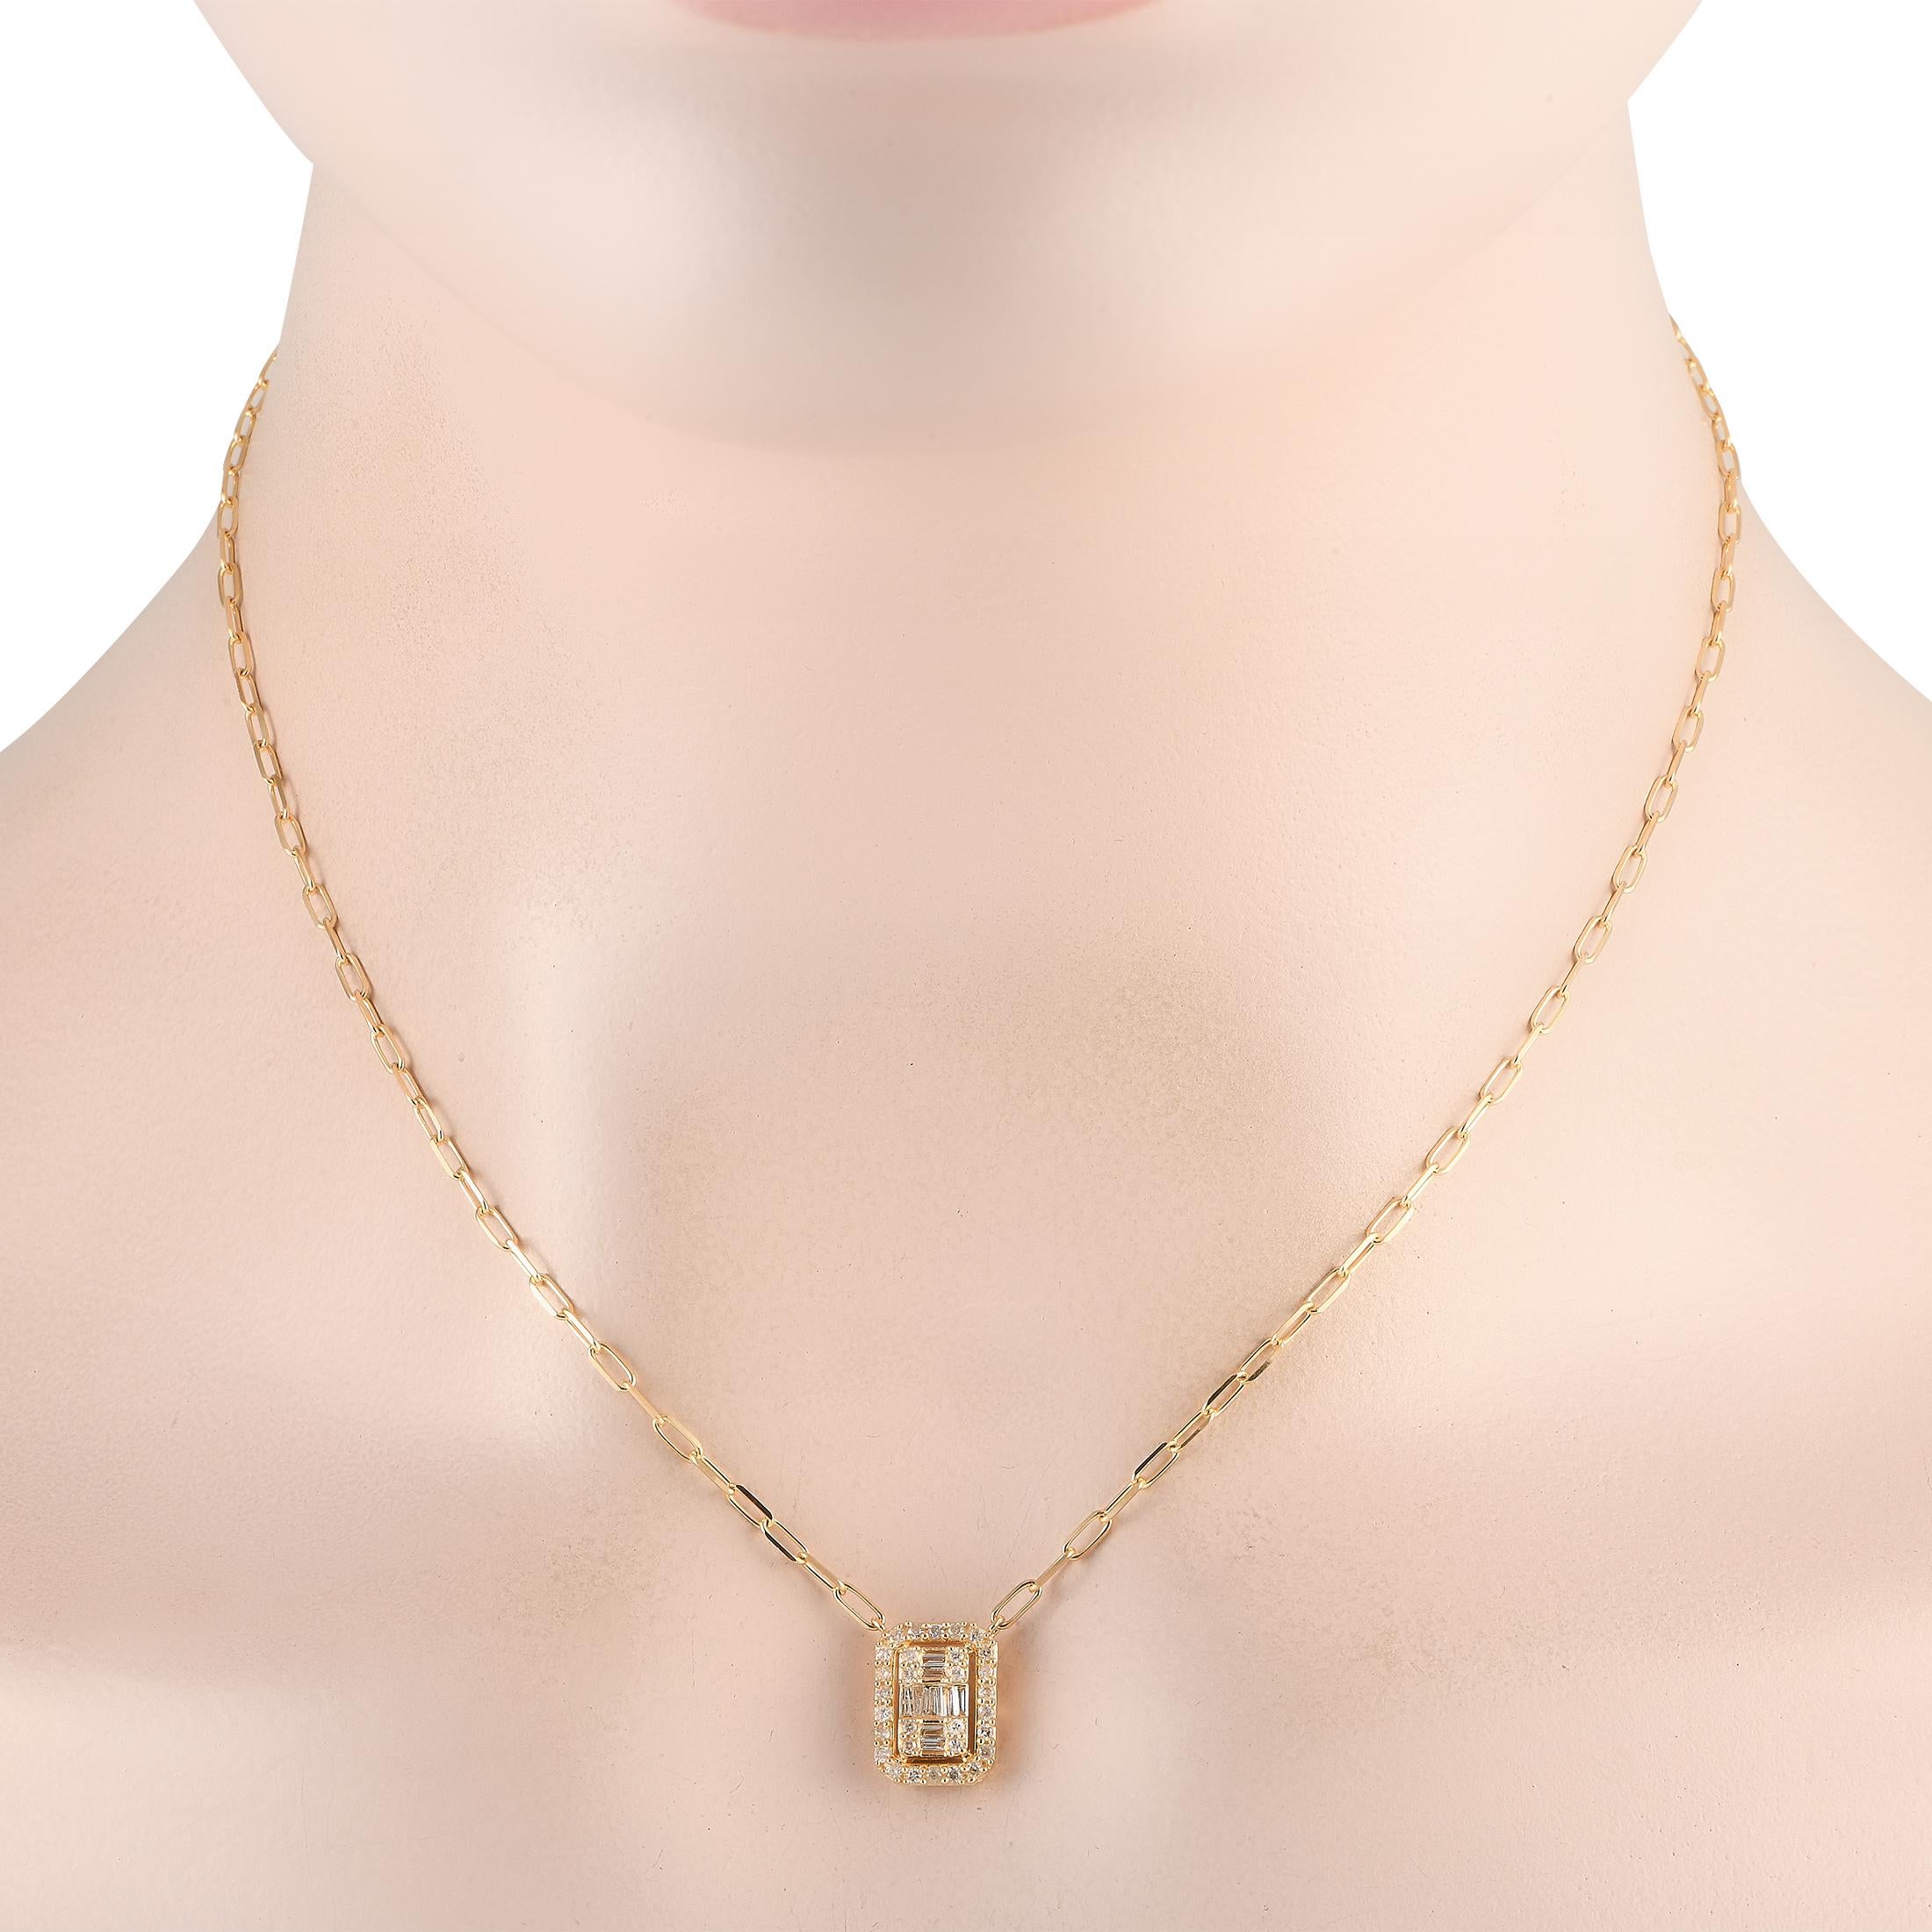 A necklace designed with all-day sparkle in mind. This piece features a slender paperclip chain and a rectangular pendant. The pendant shines with a cluster of round and baguette diamonds surrounded by a rounded rectangle frame of more round